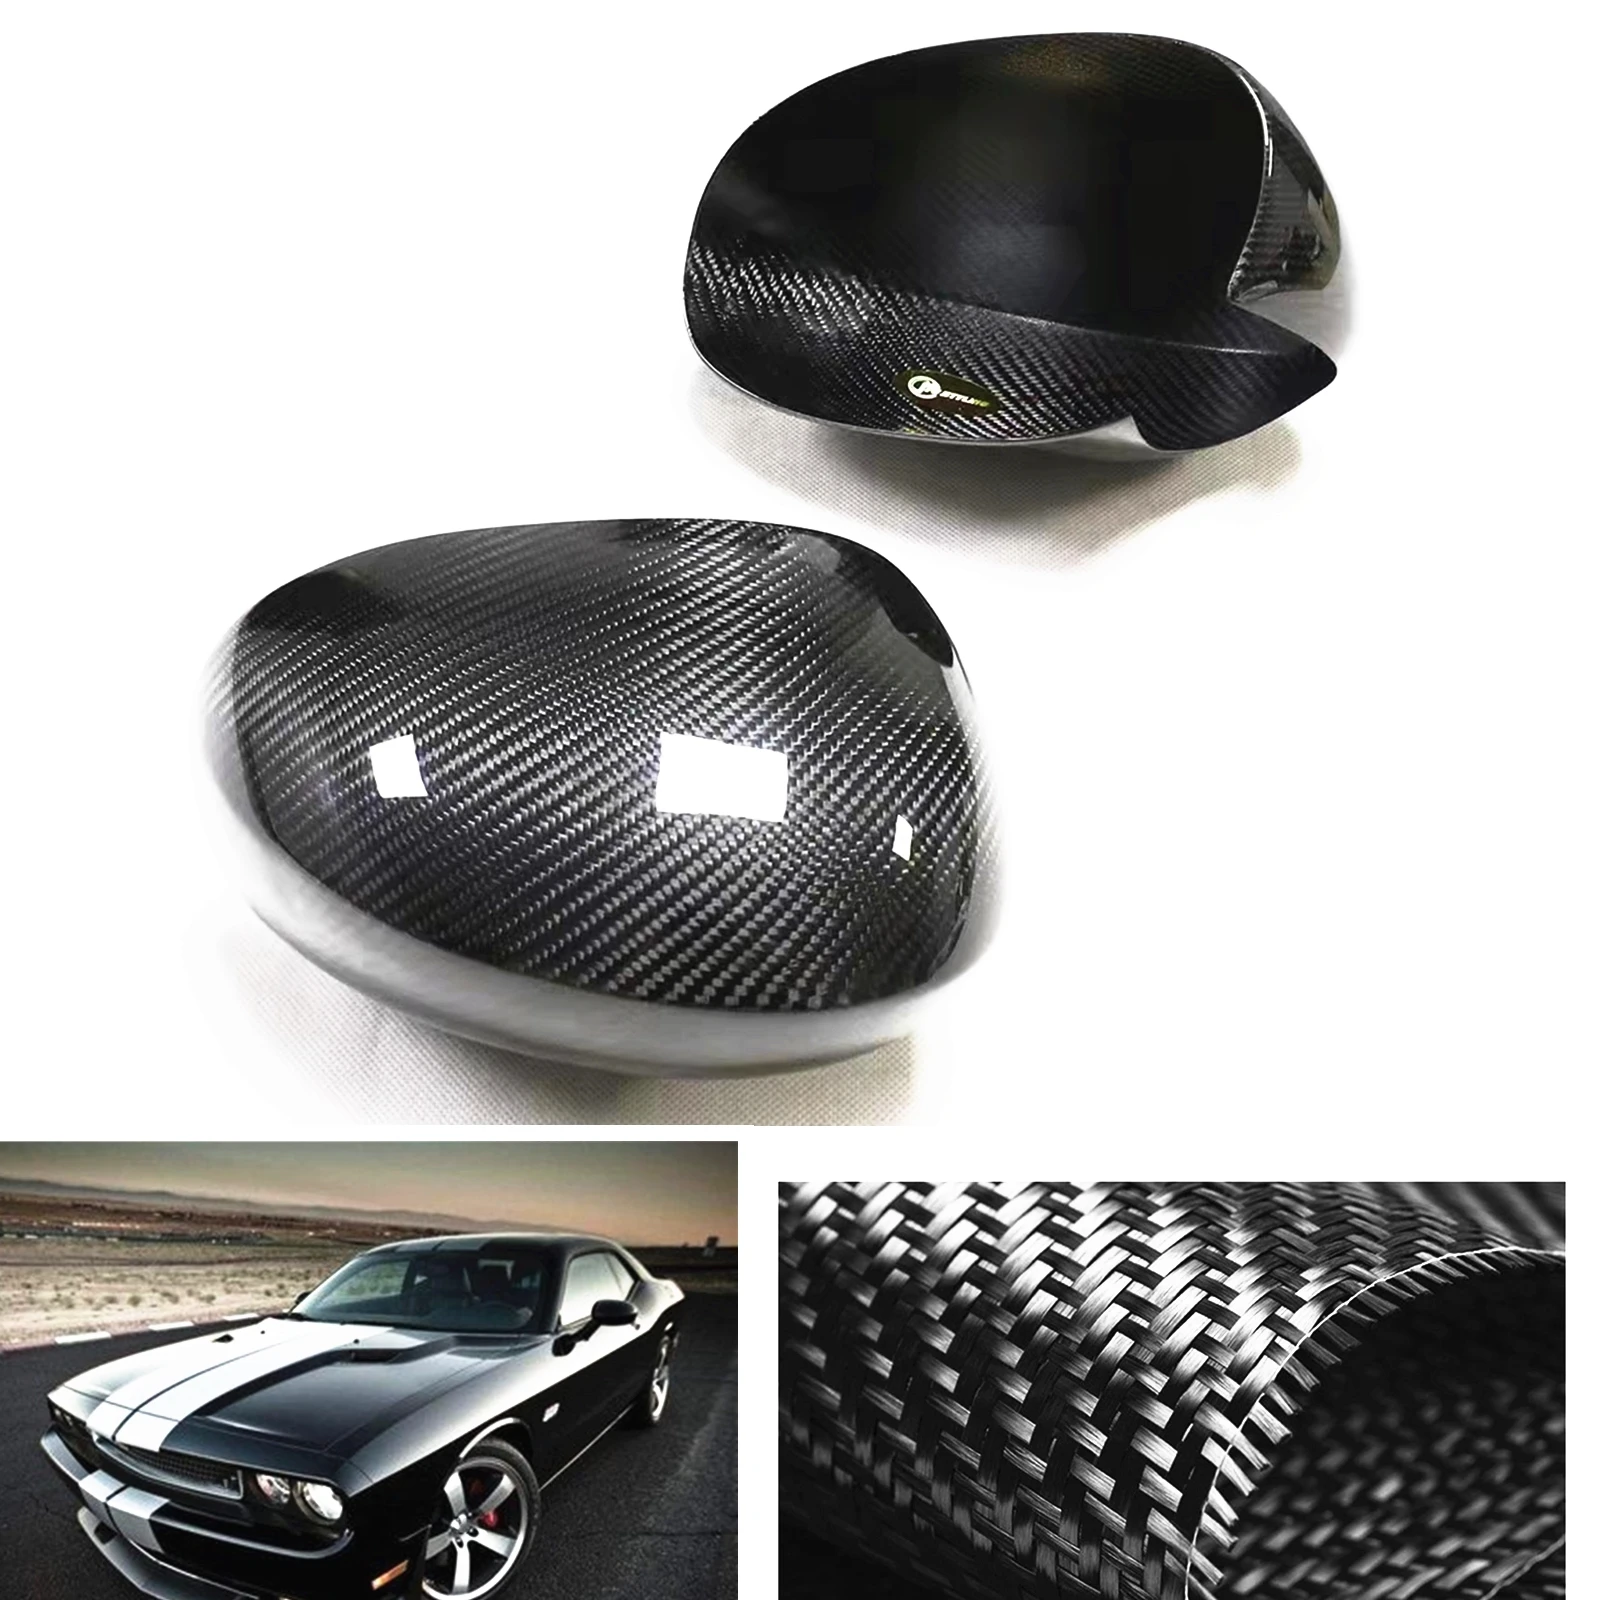 

Mirror Cover For Dodge Challenger 2009-2020 Real Dry Carbon Fiber Car Exterior Rearview Reverse Shell Rear View Cap Case Add On